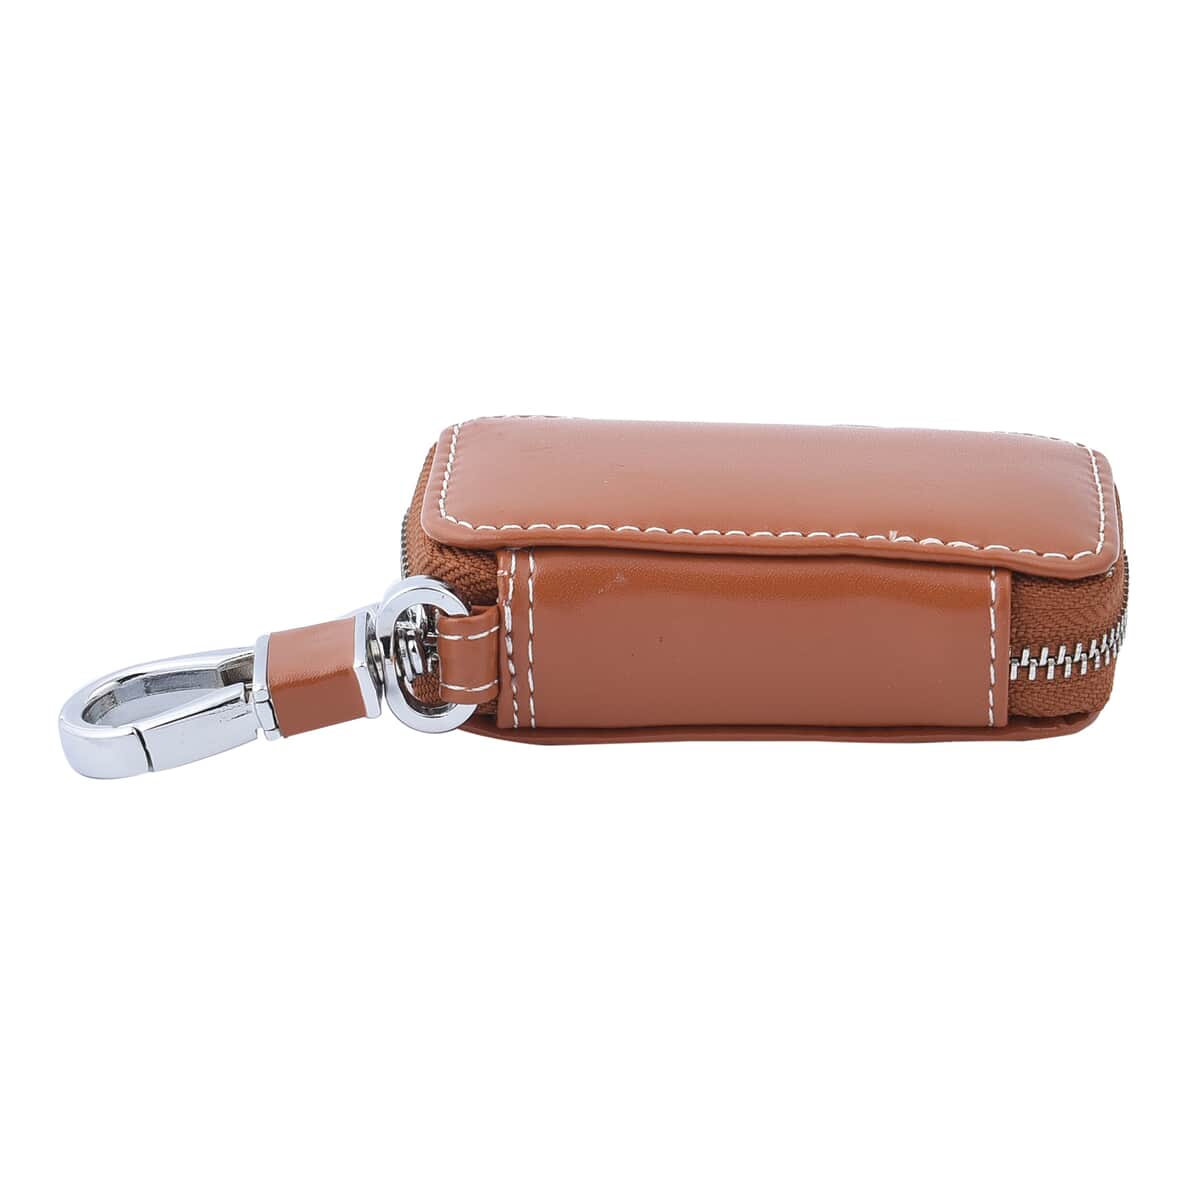 Brown Square-Shaped Genuine Leather Bag With Swivel Metallic Snap Hoop, Zipper Closure, and Key-ring For Car Keys, Remote image number 4